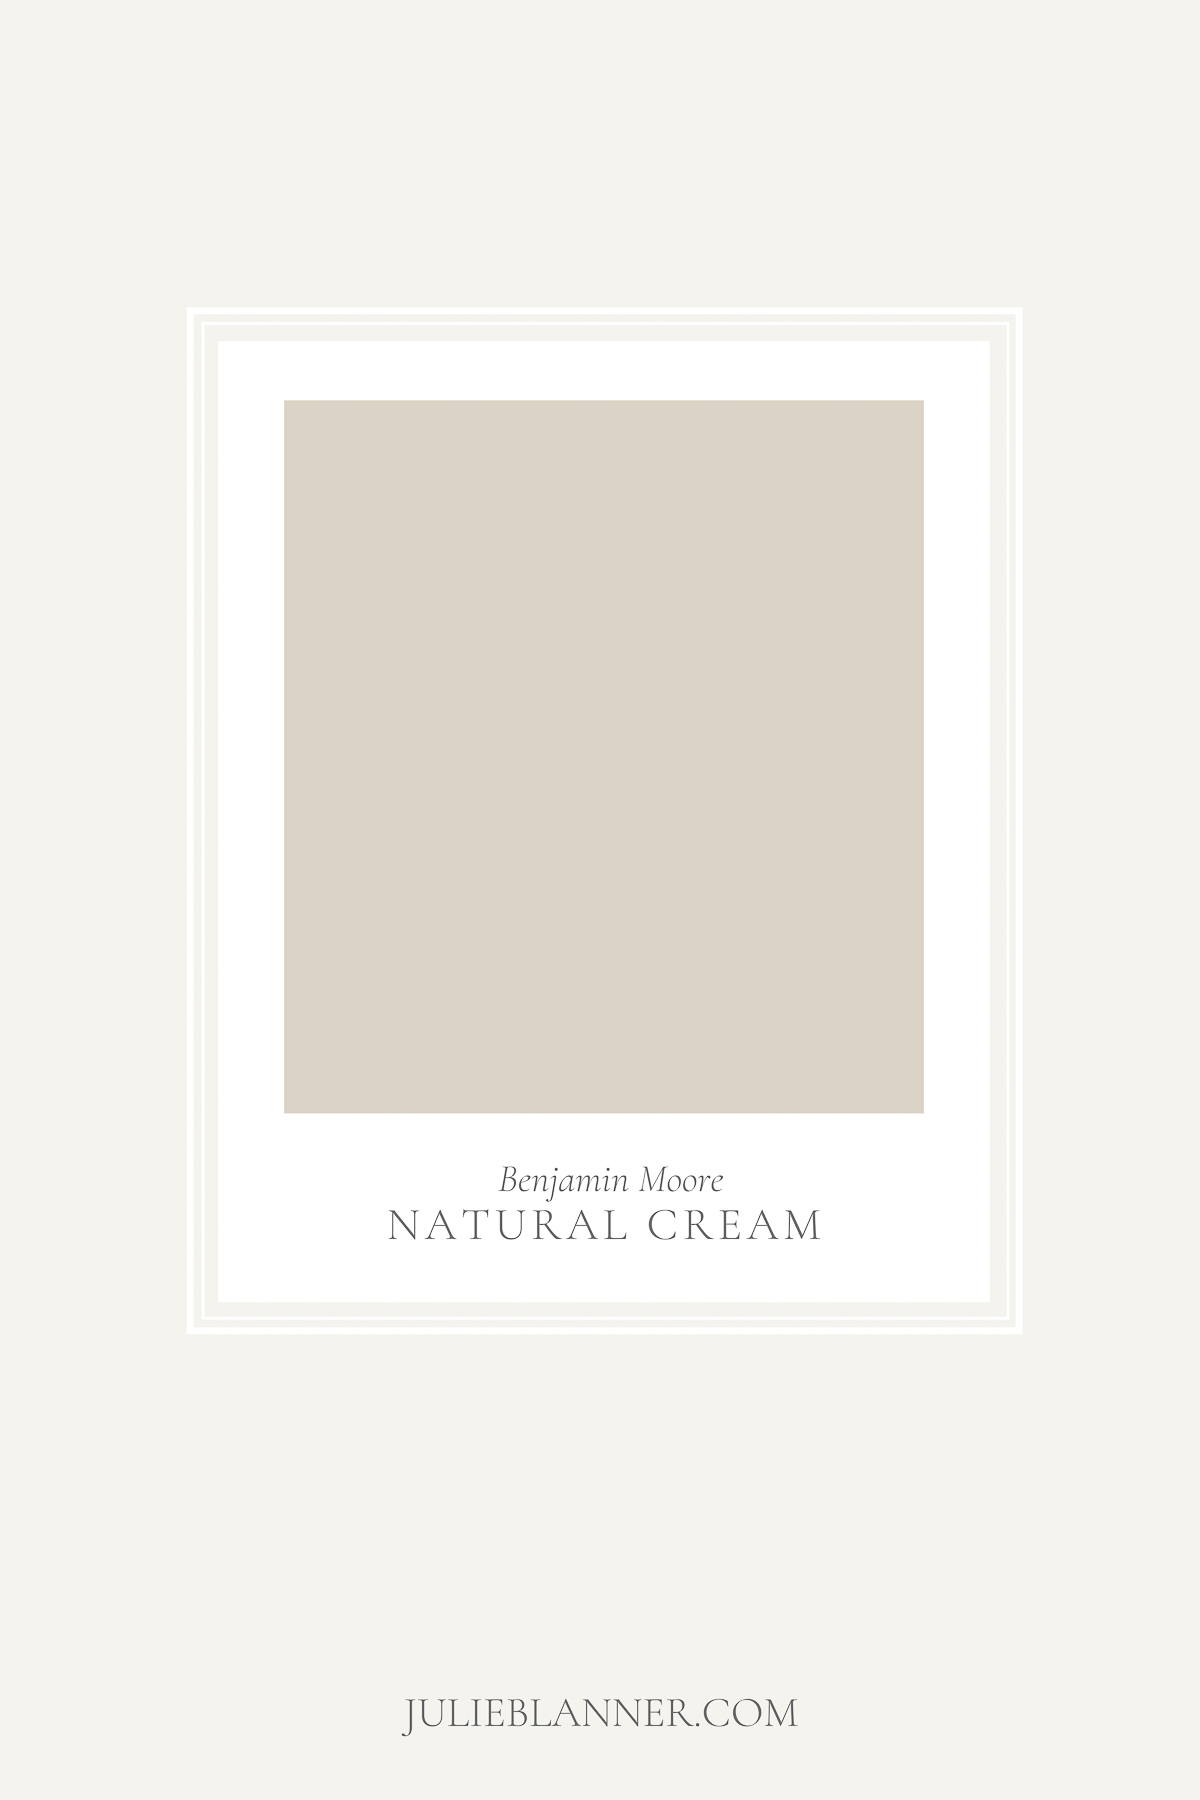 A graphic featuring a paint card for Benjamin Moore Natural Cream, a deck paint color.